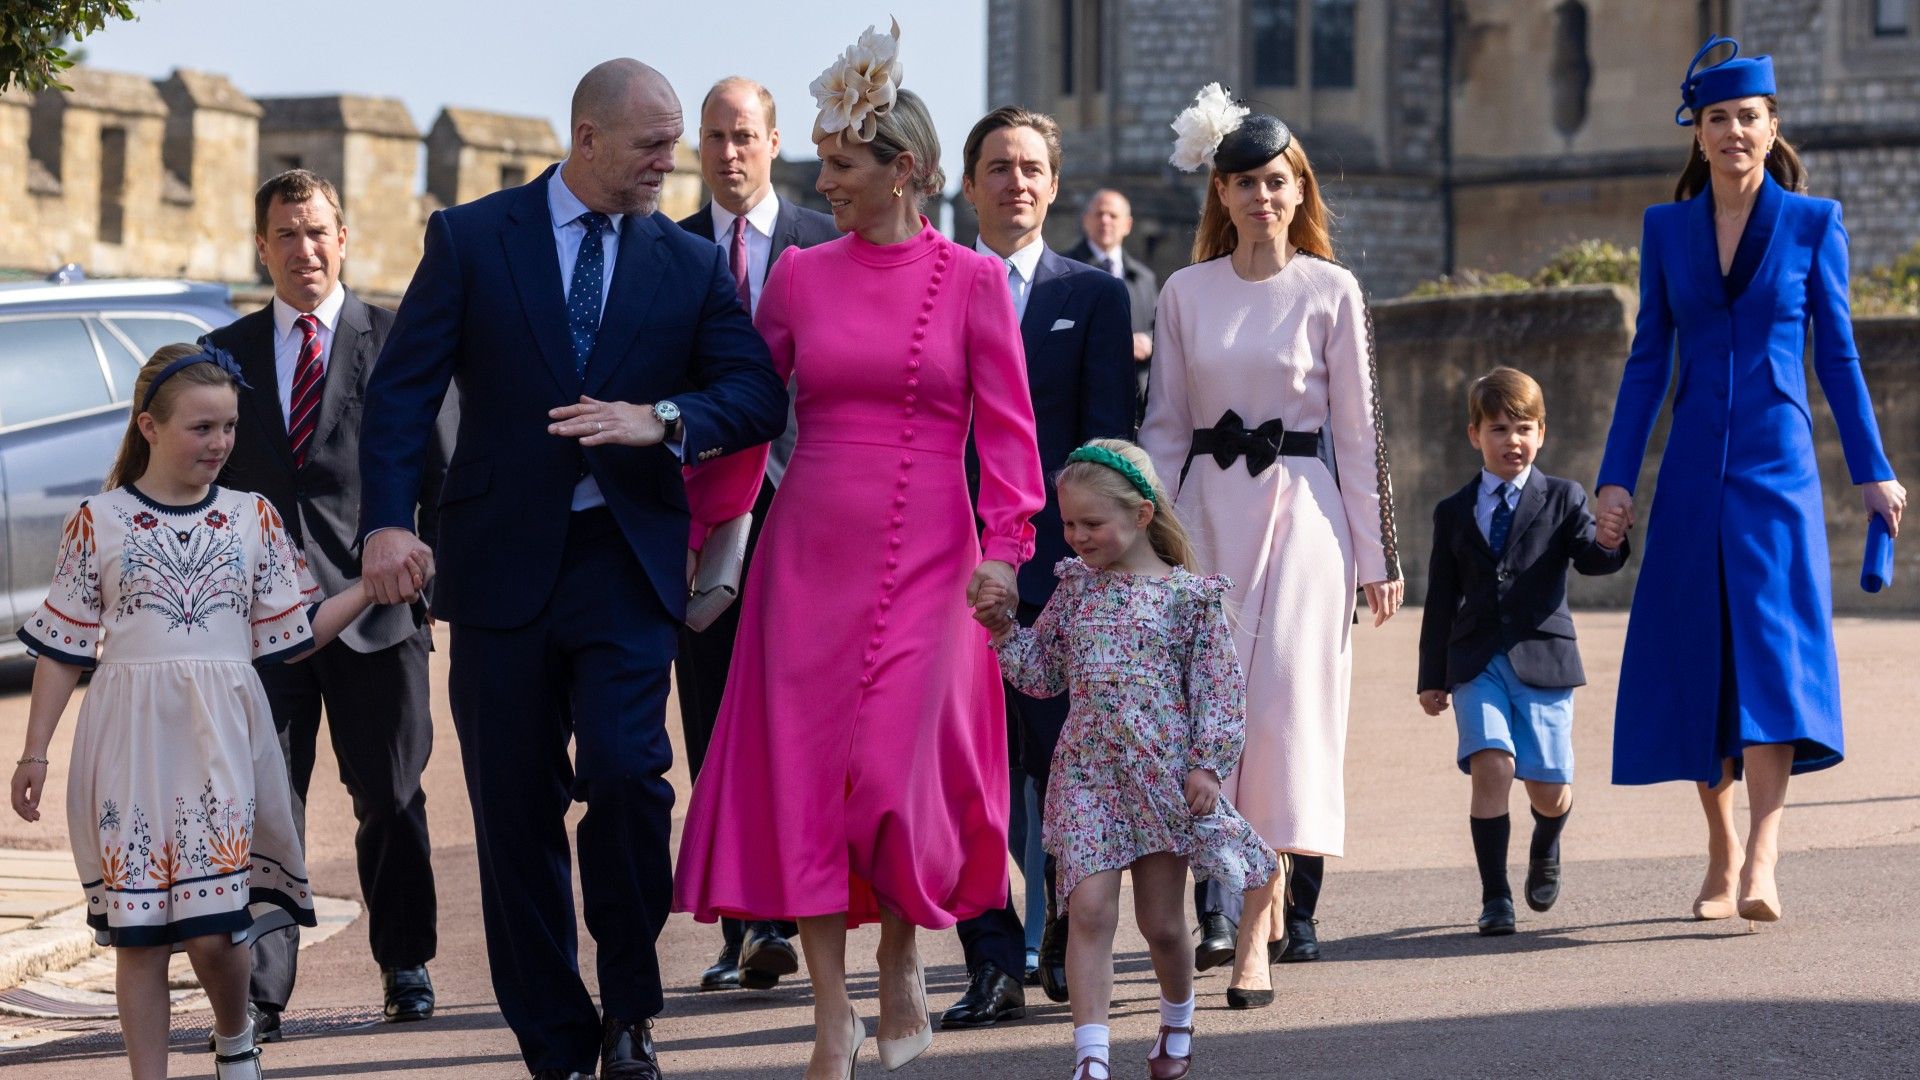 <p>                     On Easter Sunday every year, you can guarantee that you’ll spot almost the entire royal family walking to the Easter service at St. George’s Chapel, Windsor Castle.                    </p>                                      <p>                     It has become a tradition for everyone from Duchess Sophie, to King Charles, to Mike and Zara Tindall and Princess Beatrice to make the pilgrimage to church for the celebration of the religious holiday, usually with their entire families in tow. When the service is over, the family usually make their way back to Windsor Castle for a traditional lamb lunch to mark the special day.                   </p>